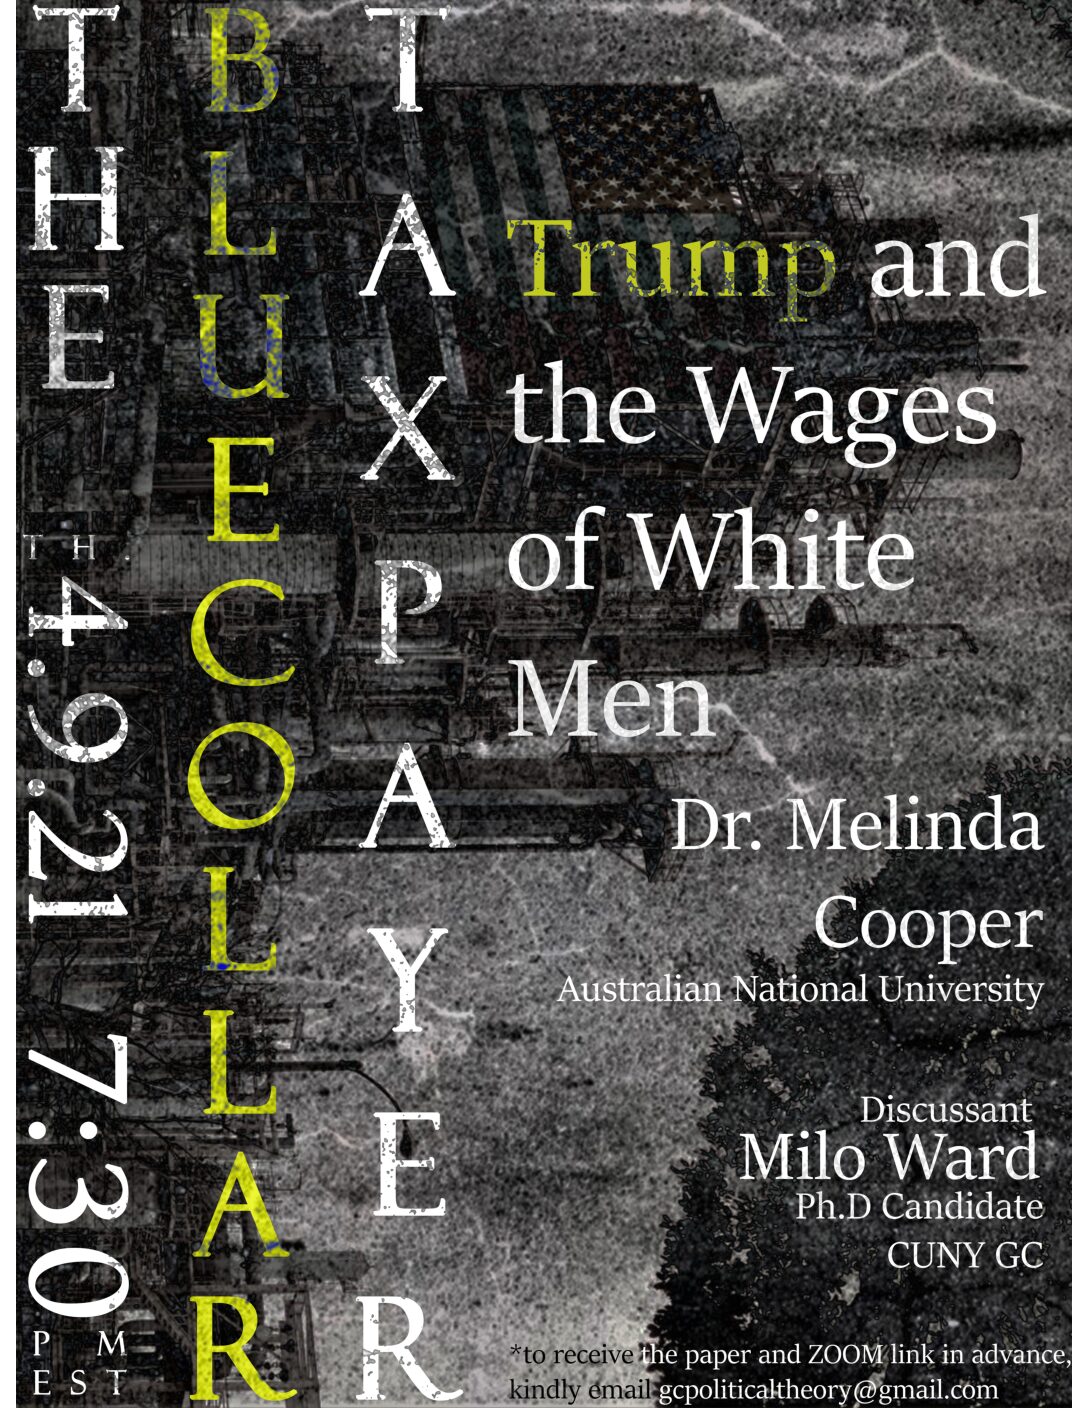 Political Theory Workshop: Melinda Cooper, "The Blue-Collar Taxpayer: Trump and The Wages of White Men," Friday, April 9, 7:30-9:30pm